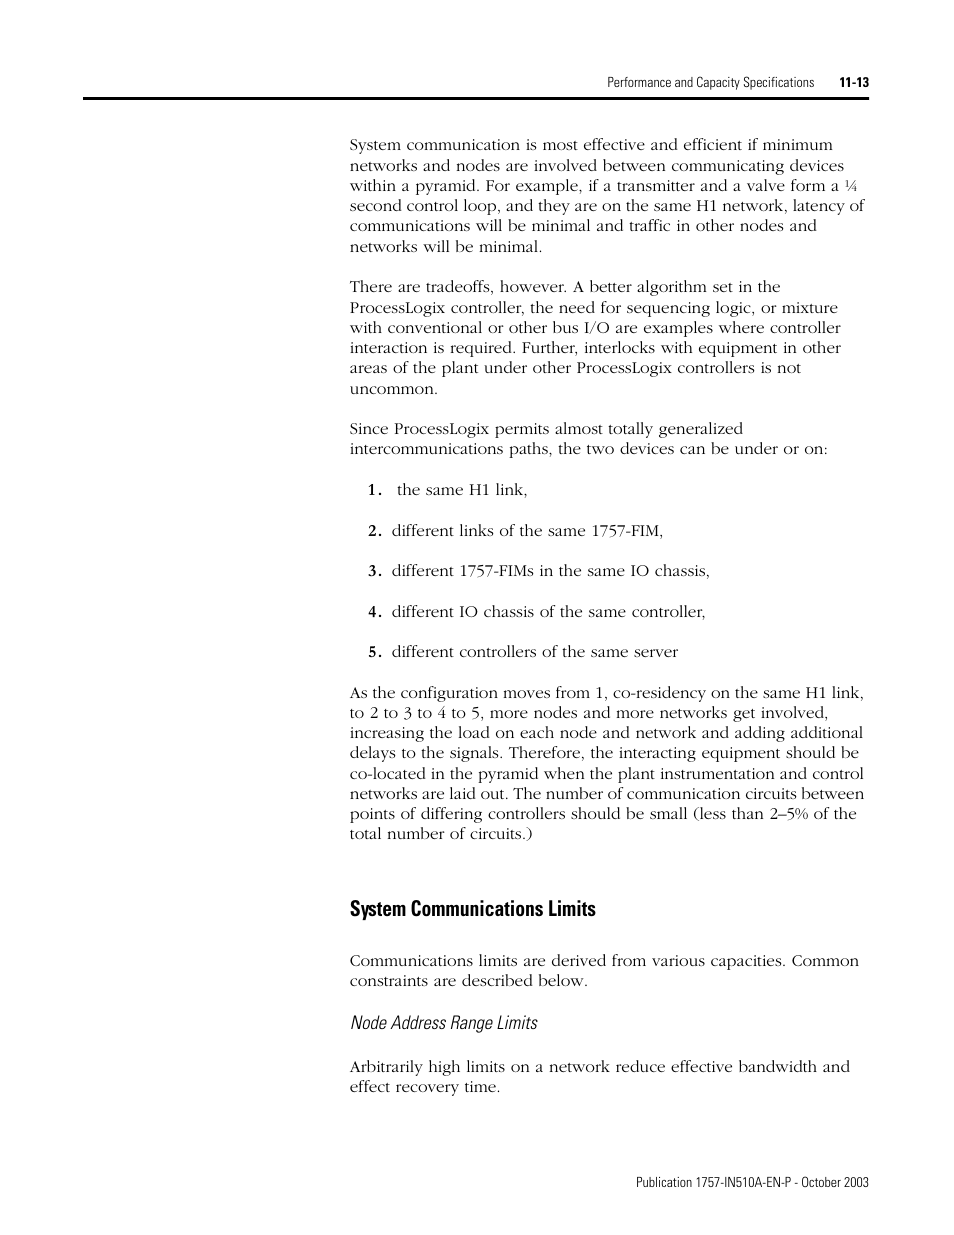 System communications limits, System communications limits -13 | Rockwell Automation 1757-SWKIT5100 ProcessLogix R510.0 Installation and Upgrade Guide User Manual | Page 253 / 271